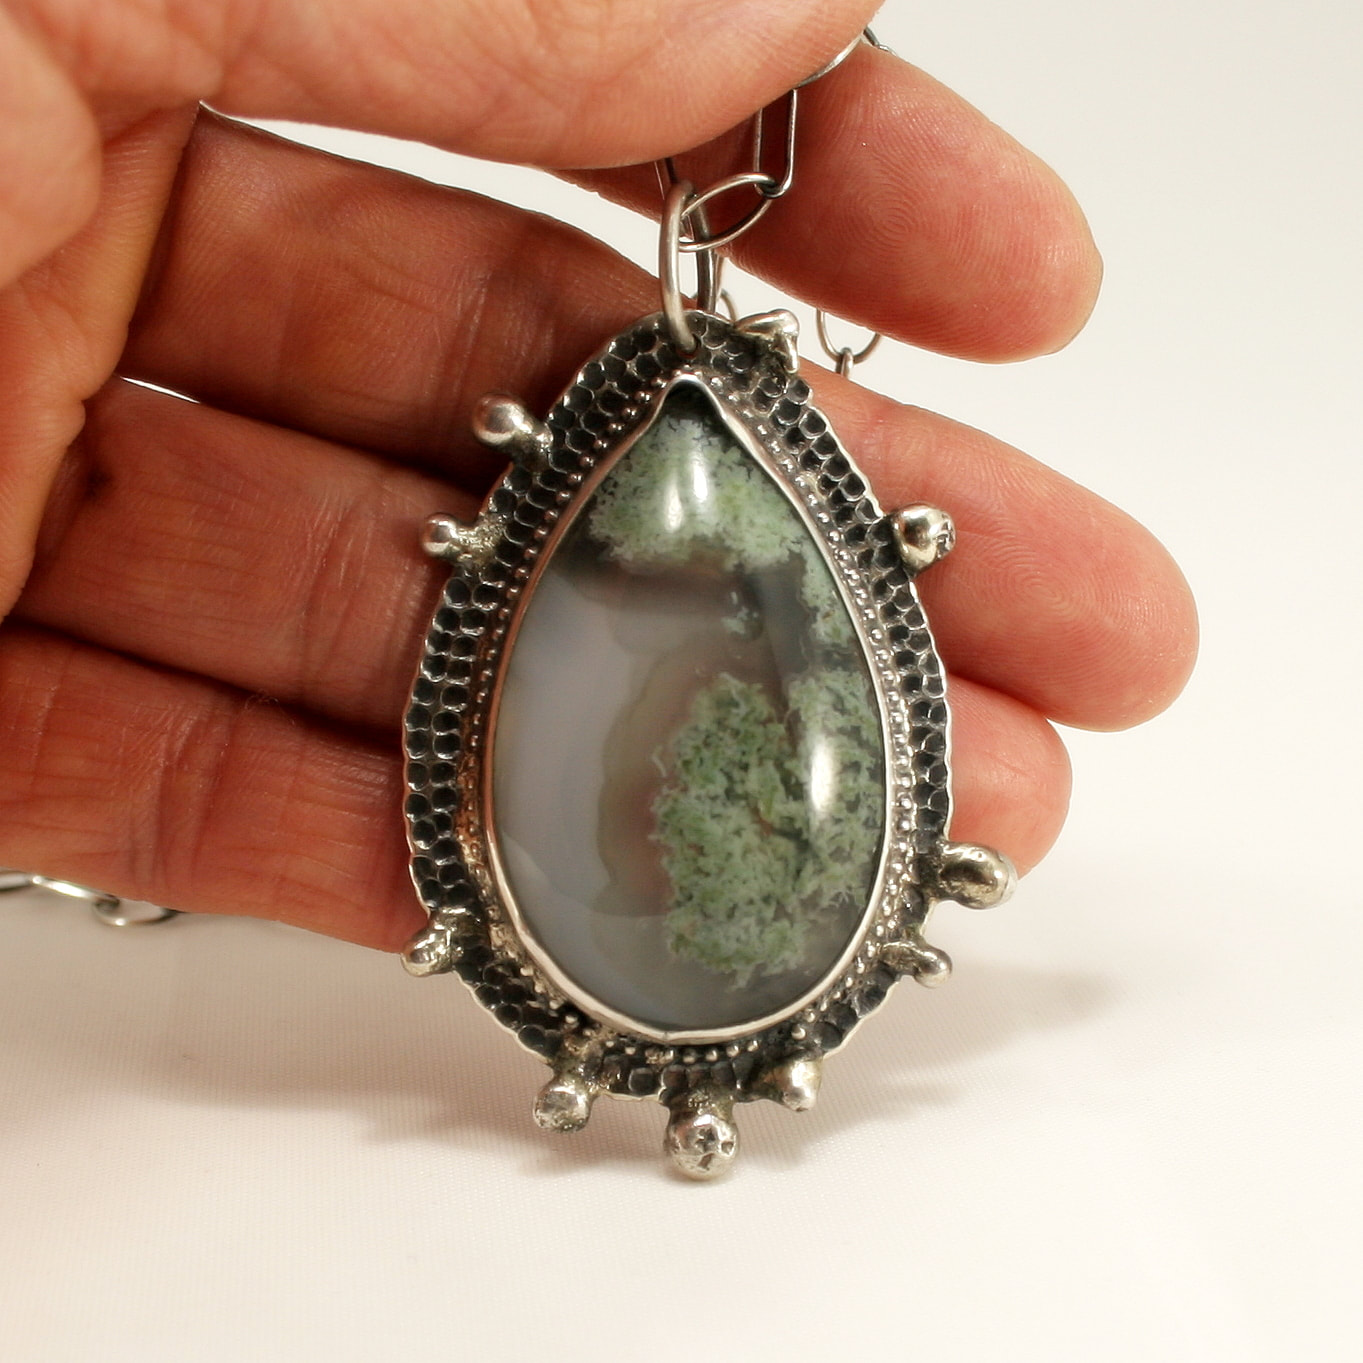 Sterling Silver & Pale Green Moss Agate Necklace Pendant by JIHI Designs